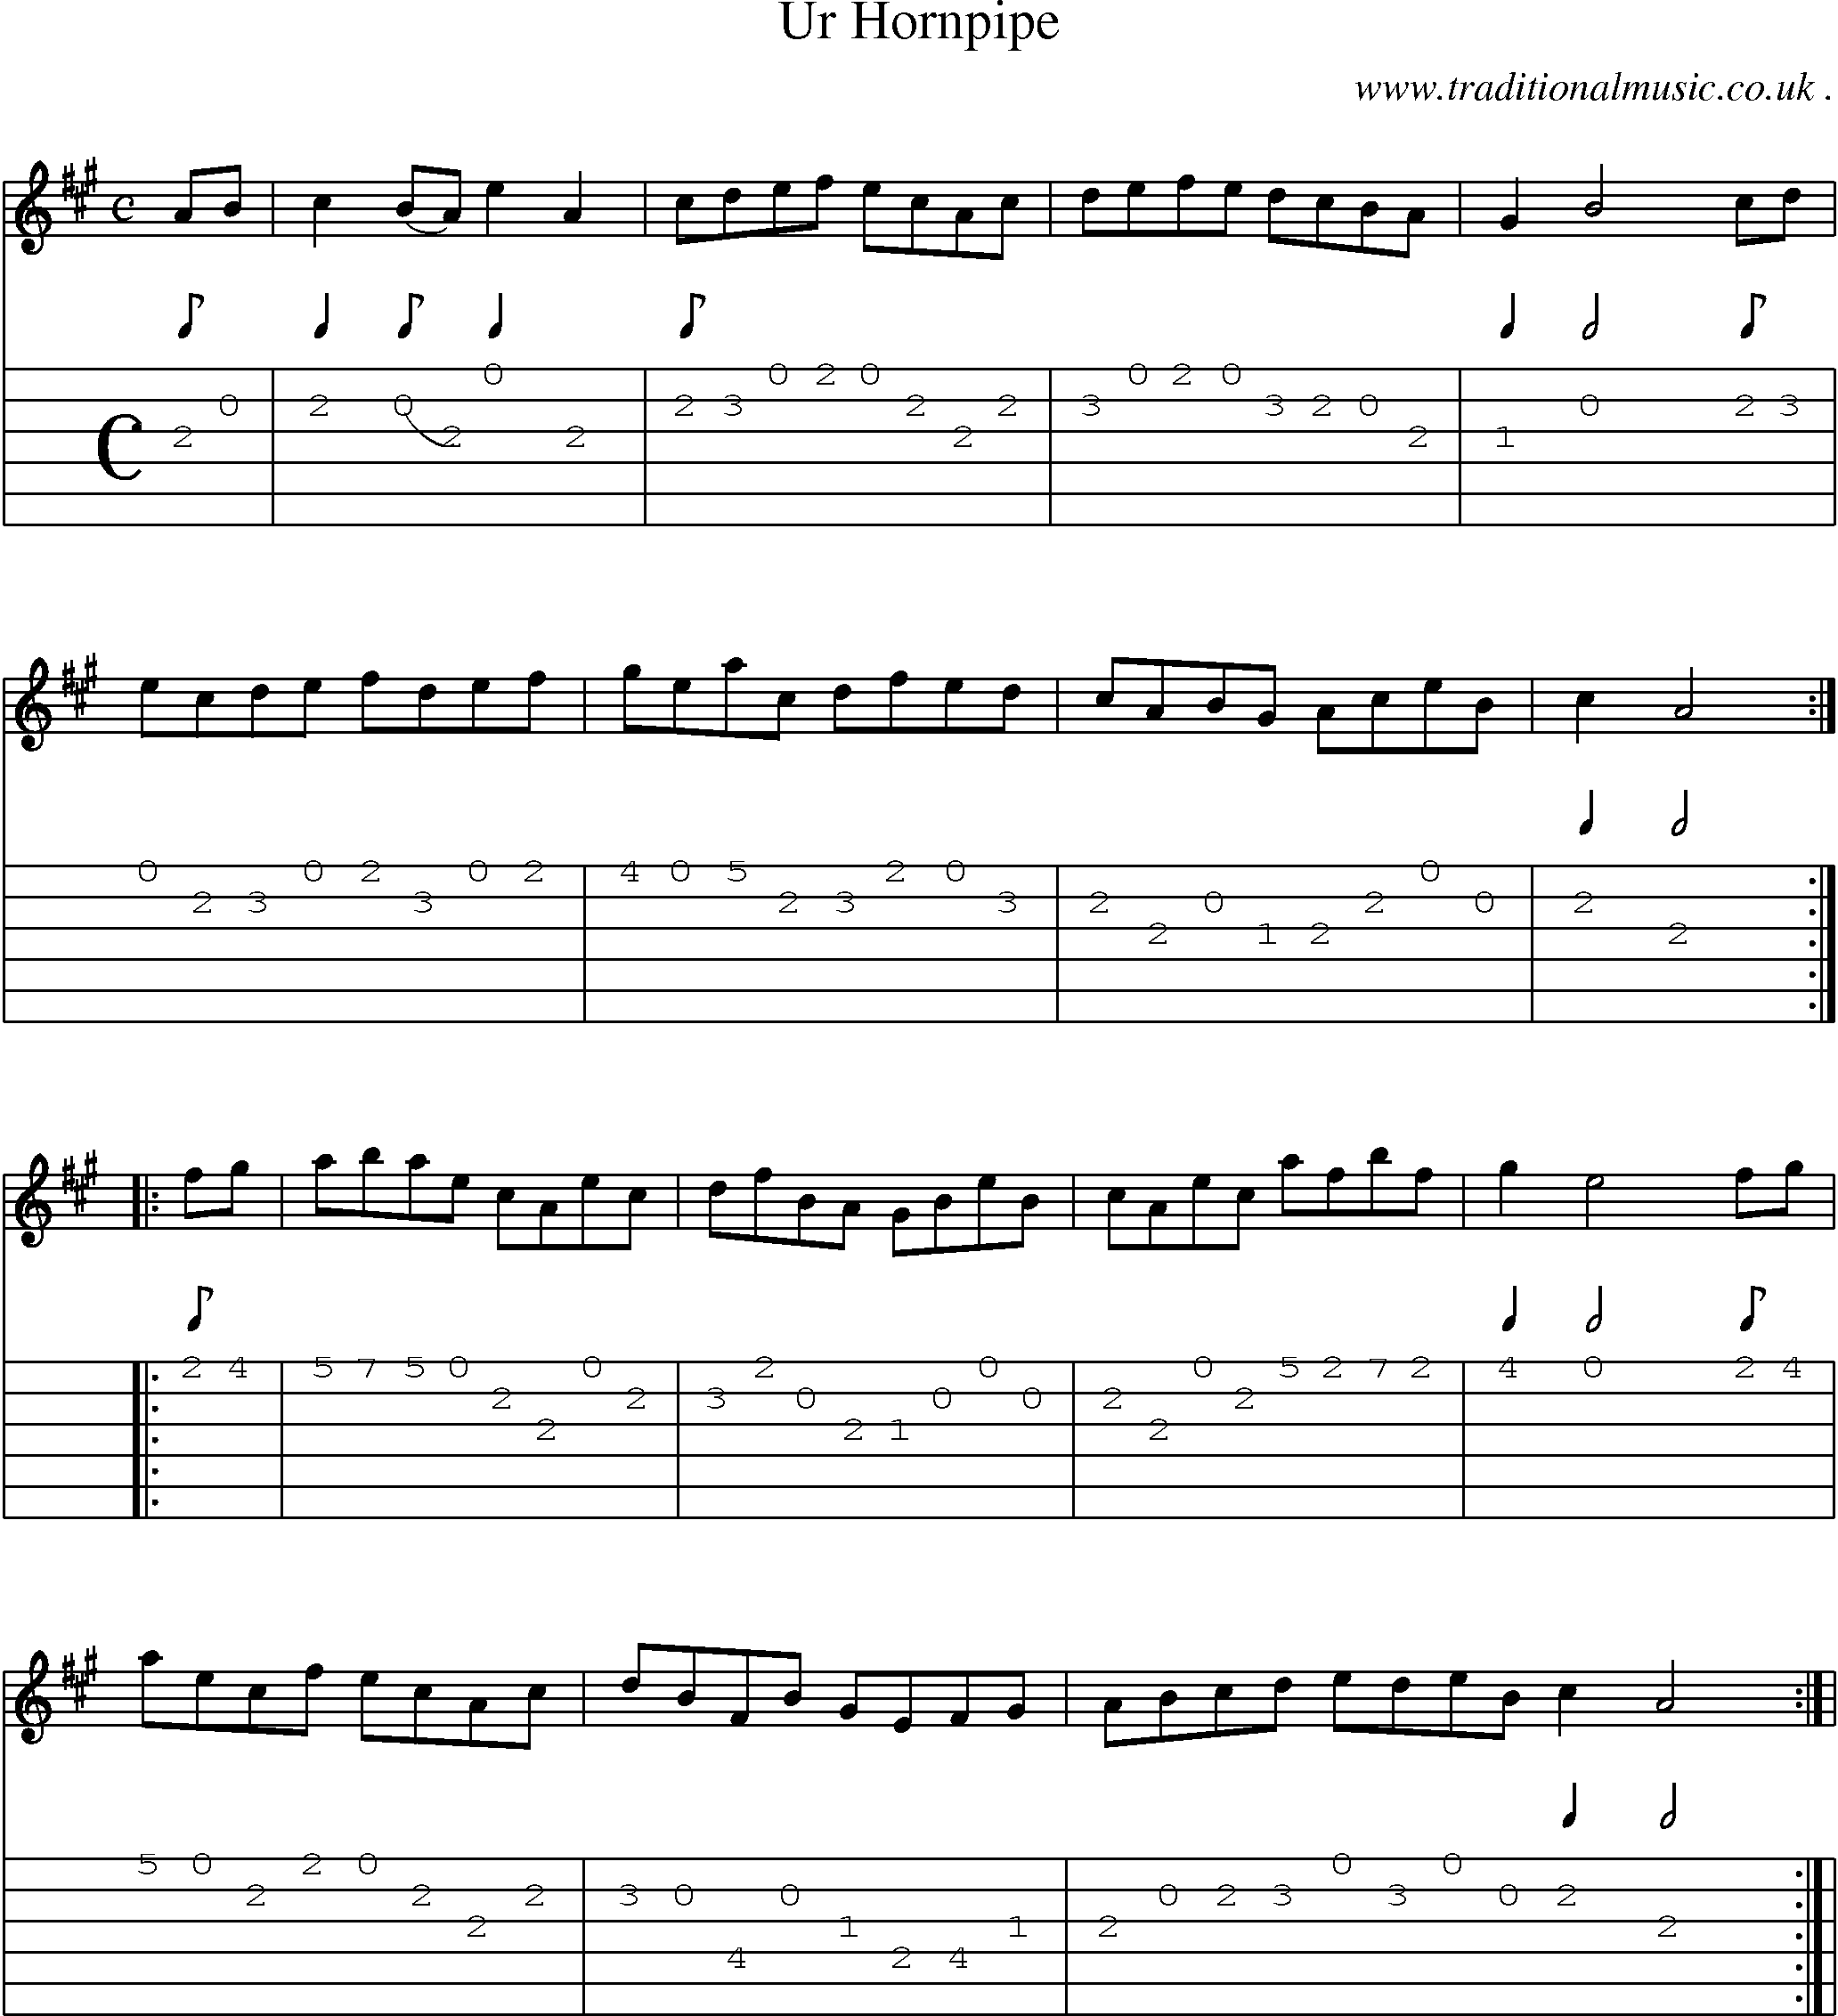 Sheet-Music and Guitar Tabs for Ur Hornpipe